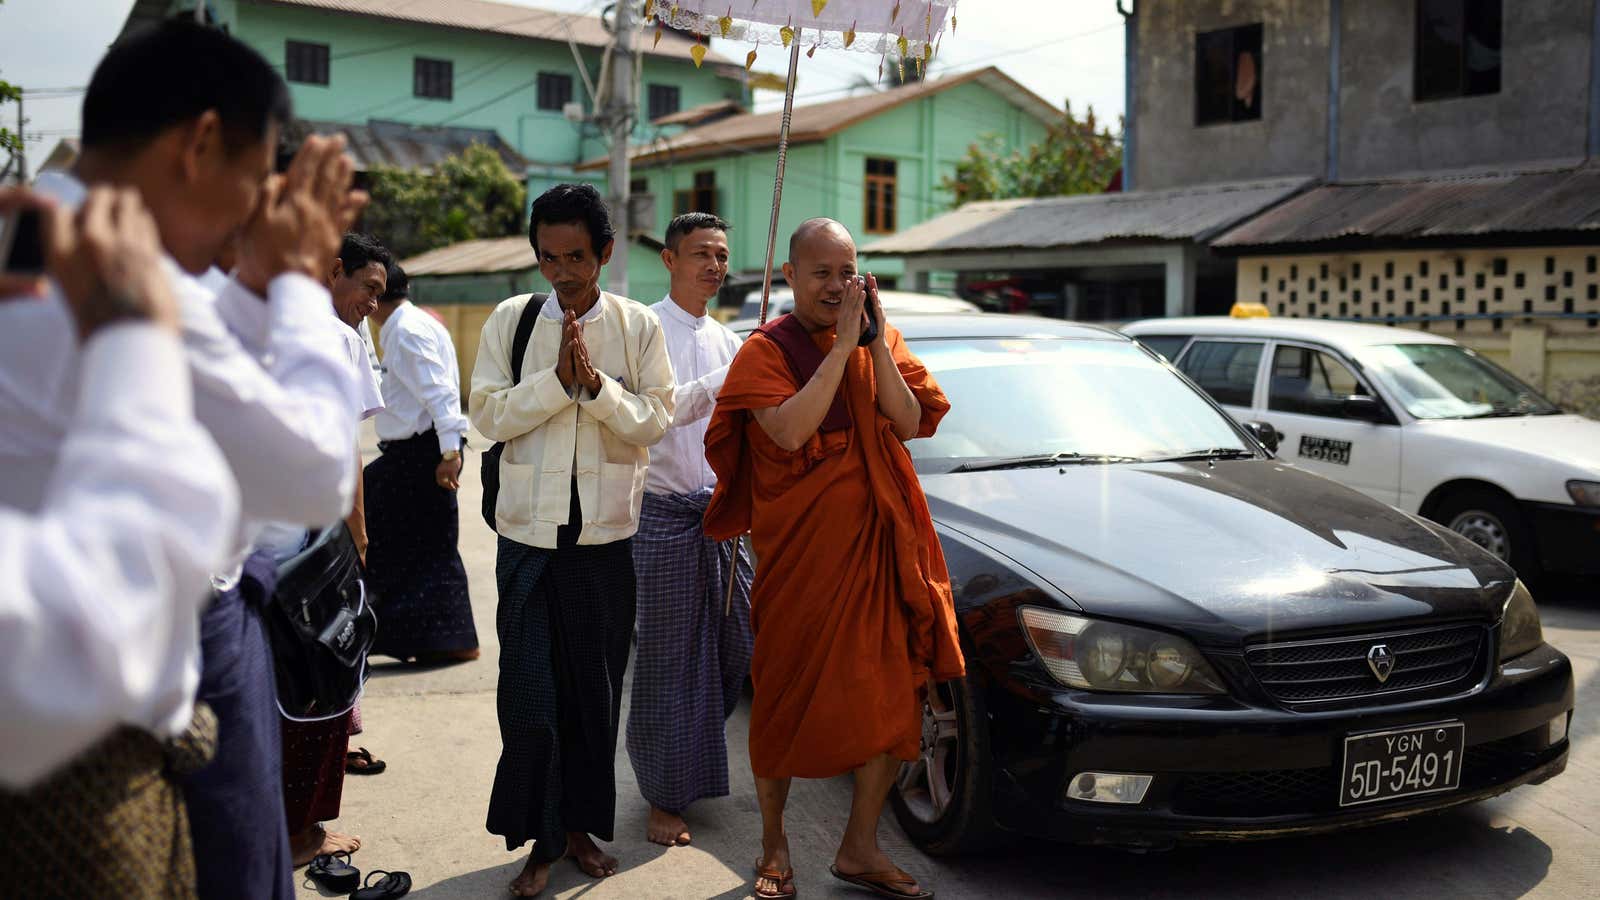 Buddhist monk Wirathu who has been spreading anti-Rohingya messages.